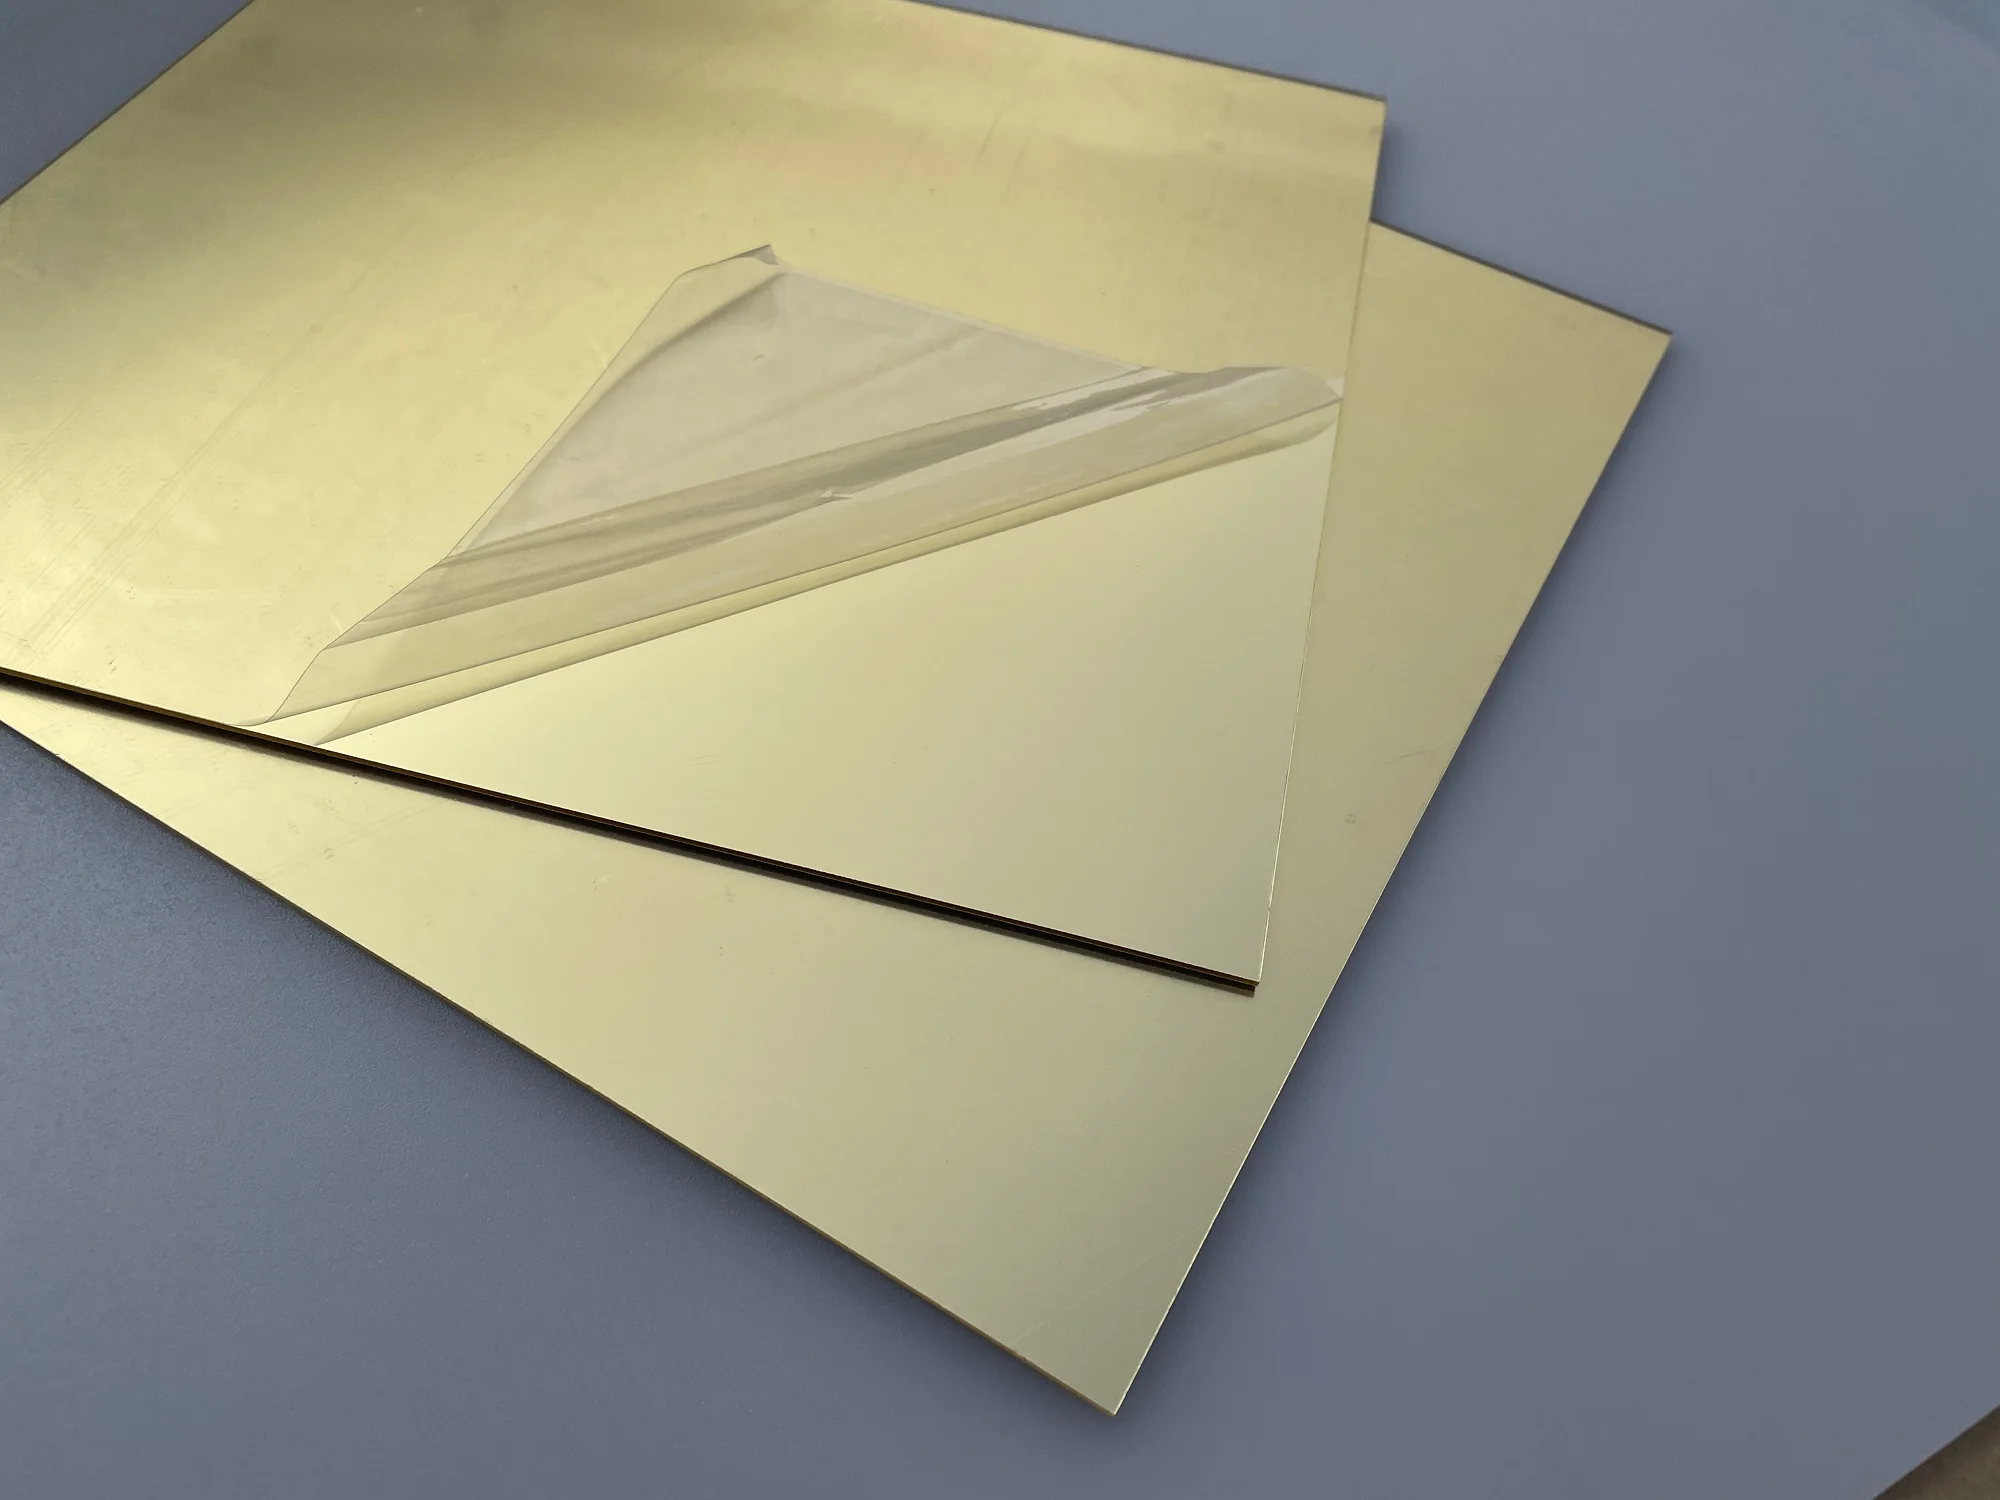 2mm Thickness Acrylic Gold Mirror Square Sheet Plastic Pier Glass Hotel  Decorative Lens Plexiglass Not Easy To Broken